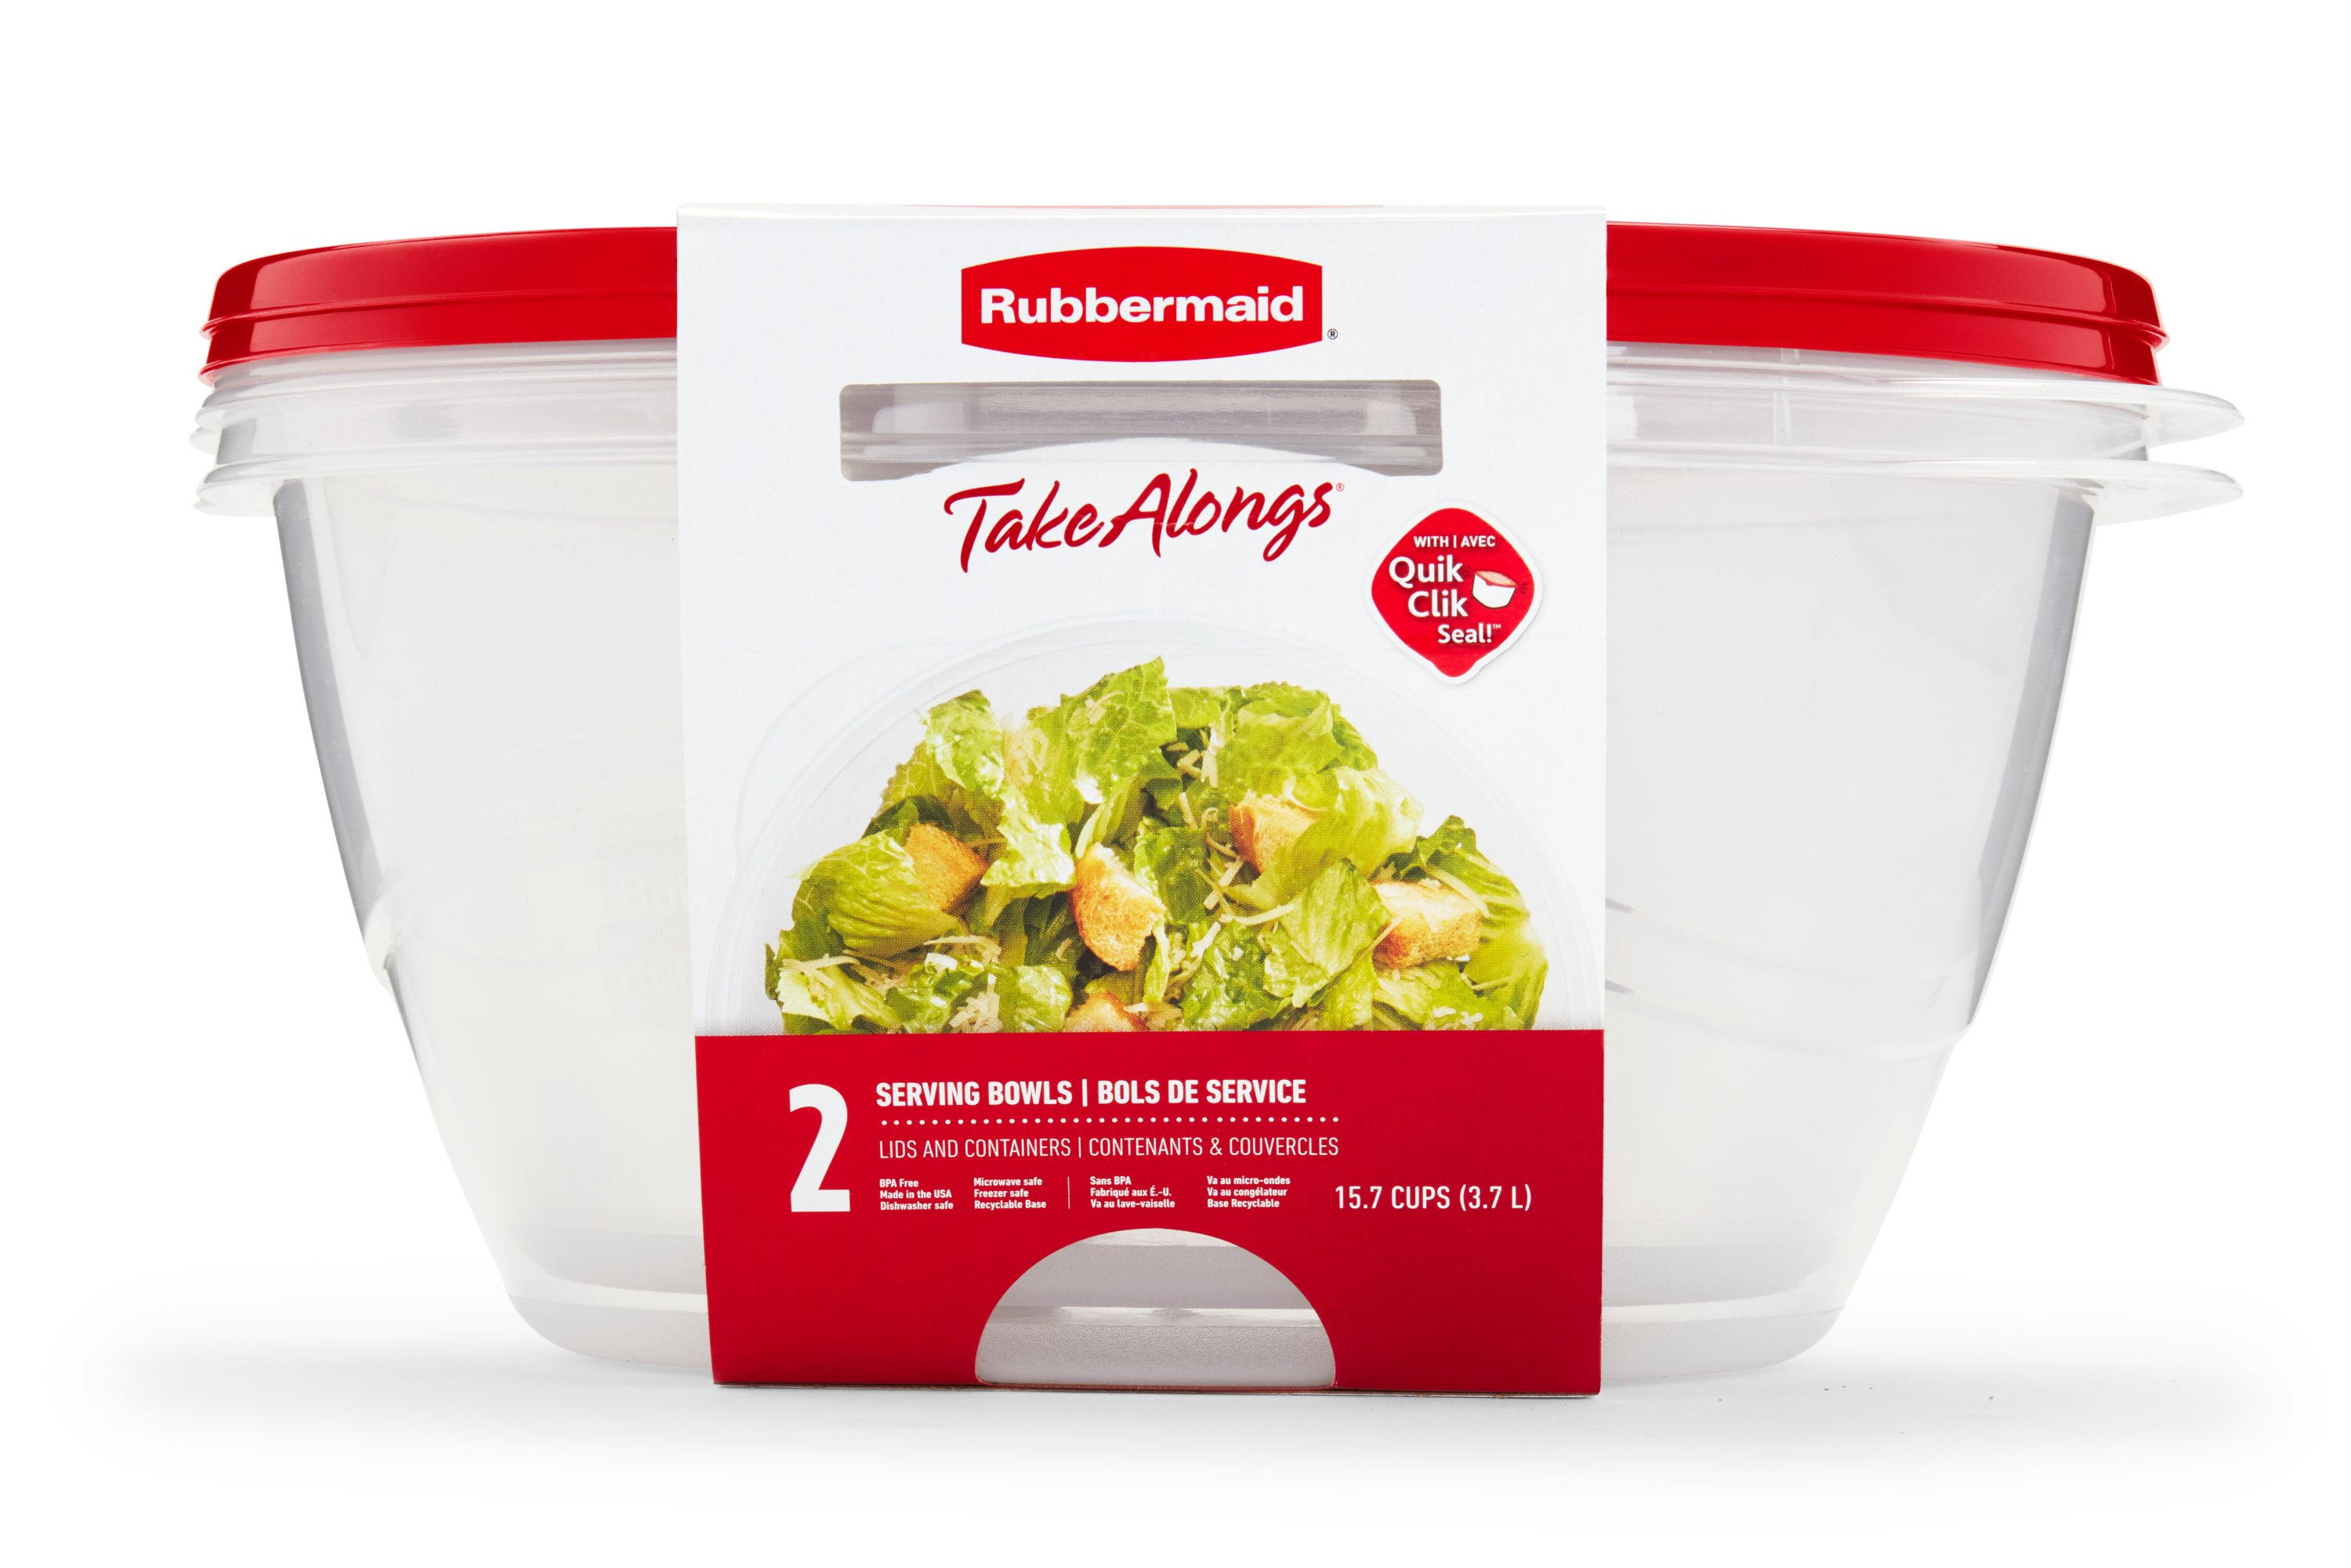 Rubbermaid® Pitcher